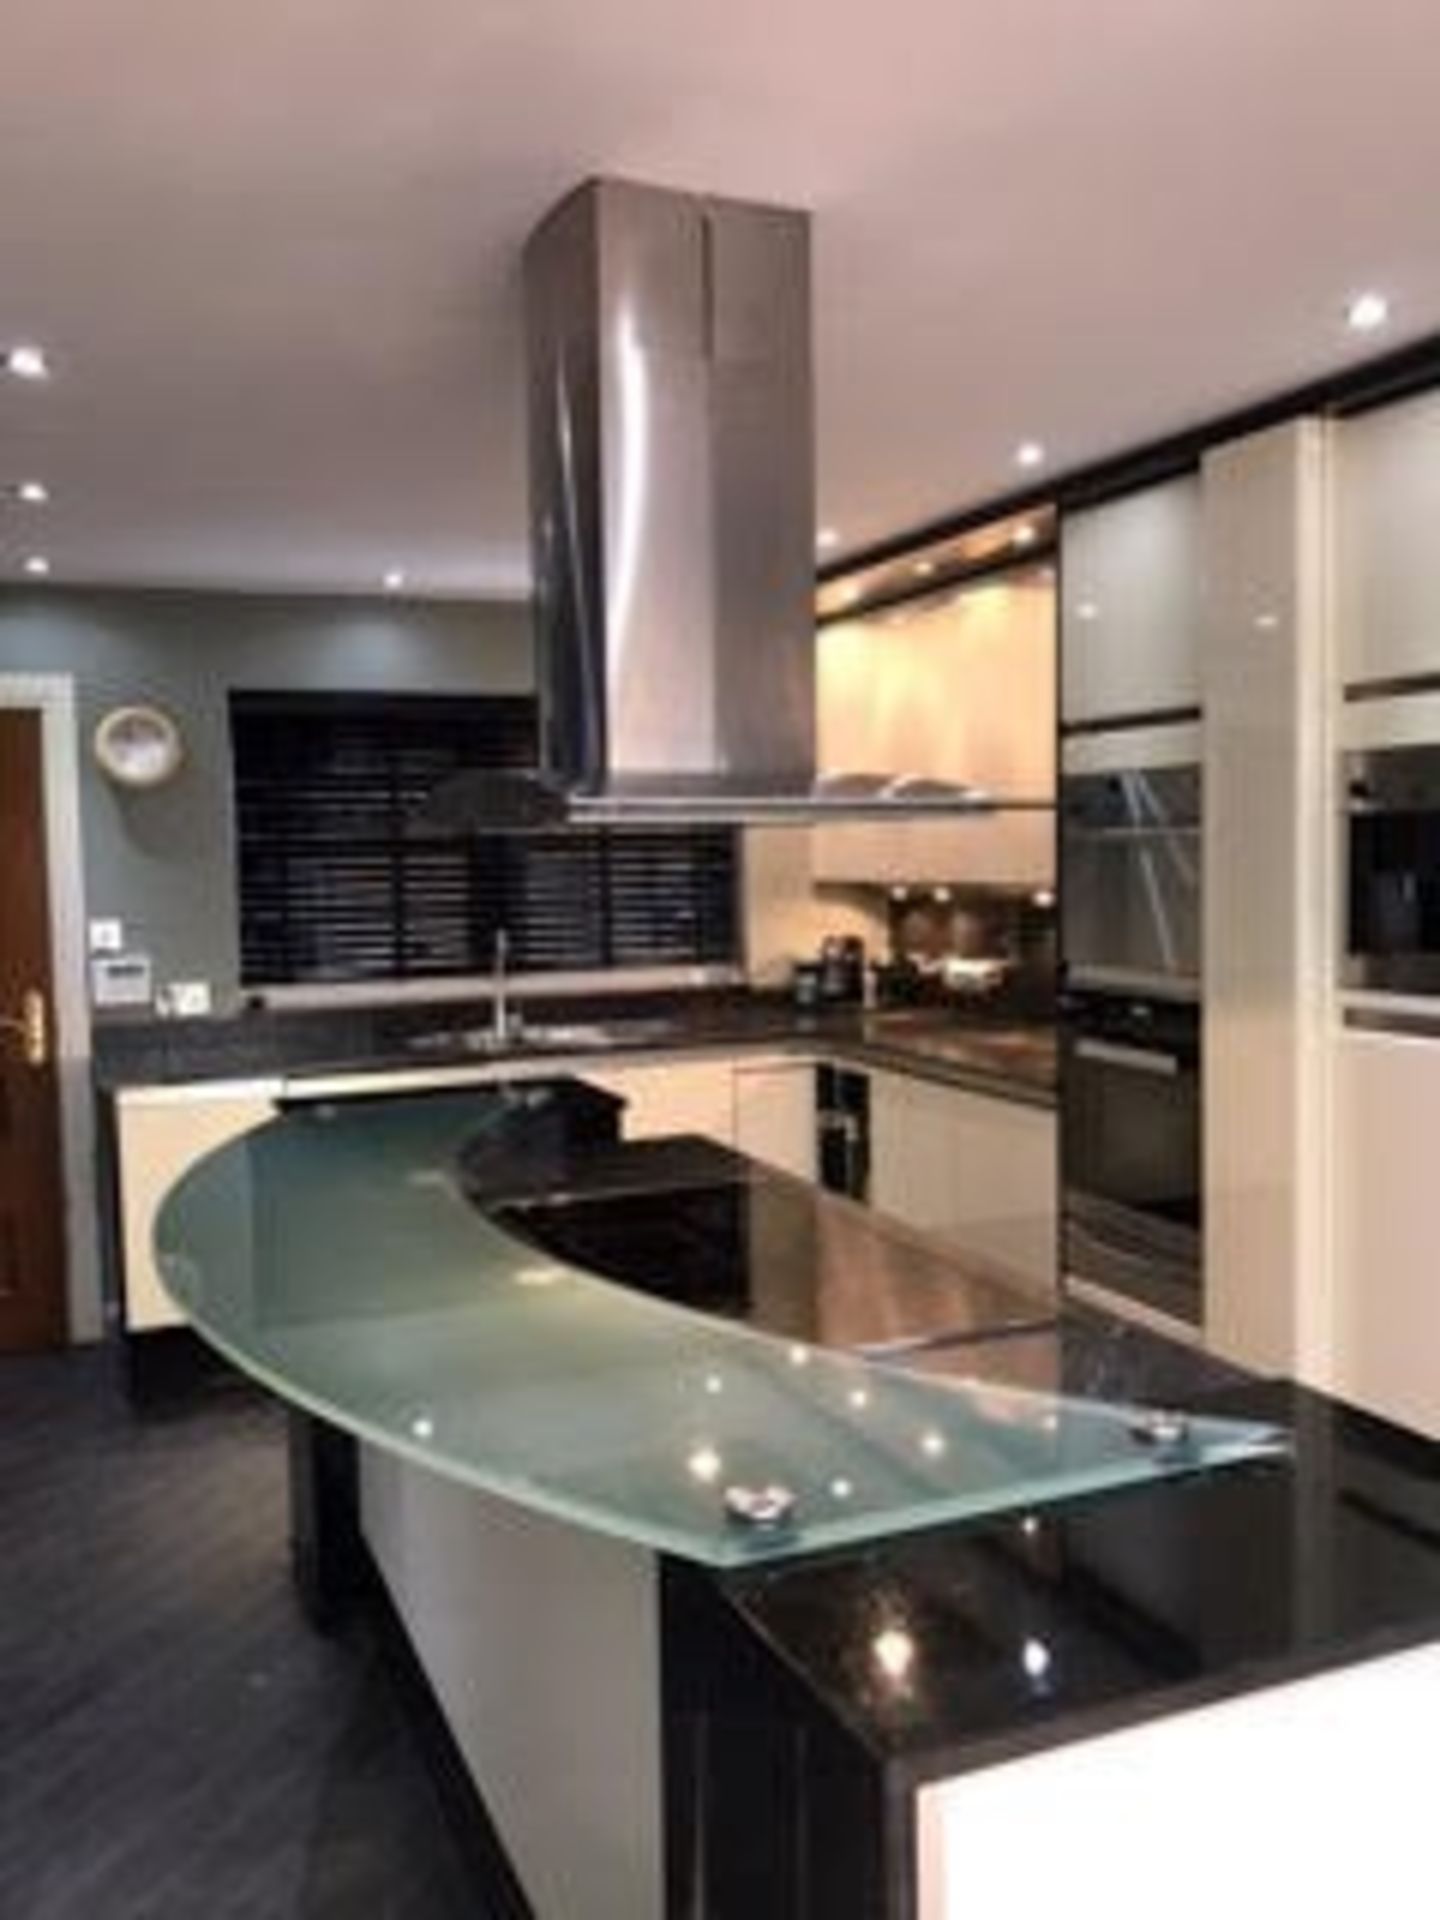 1 x Siematic Kitchen Island With Miele Hob, Gaggenau Extractor, Generous Drawer Storage And